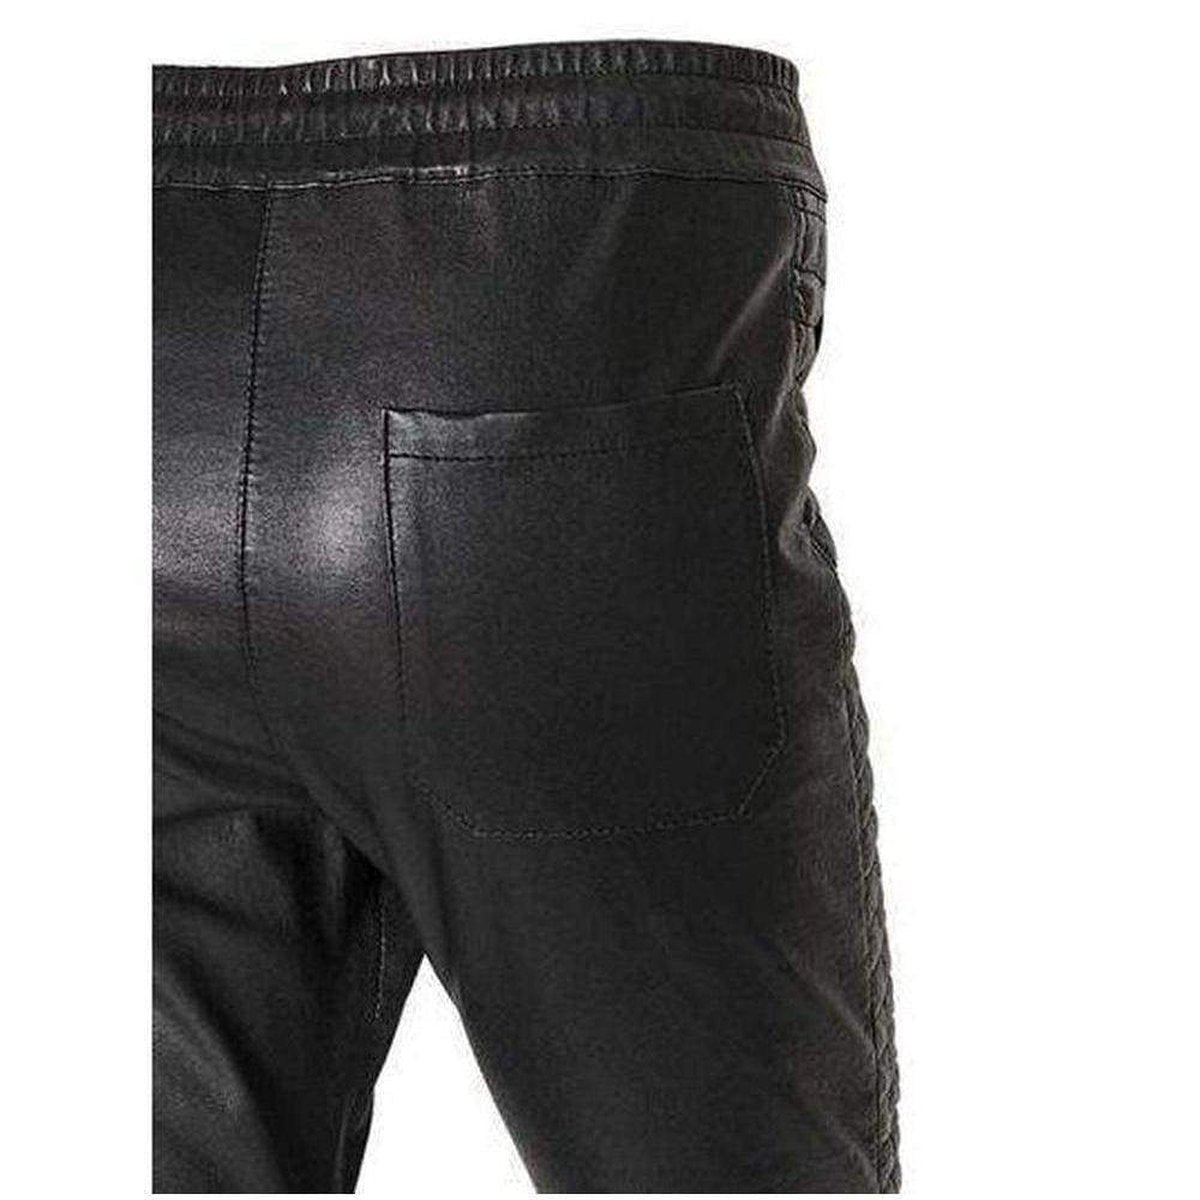 Runway Leather Trouser Pants